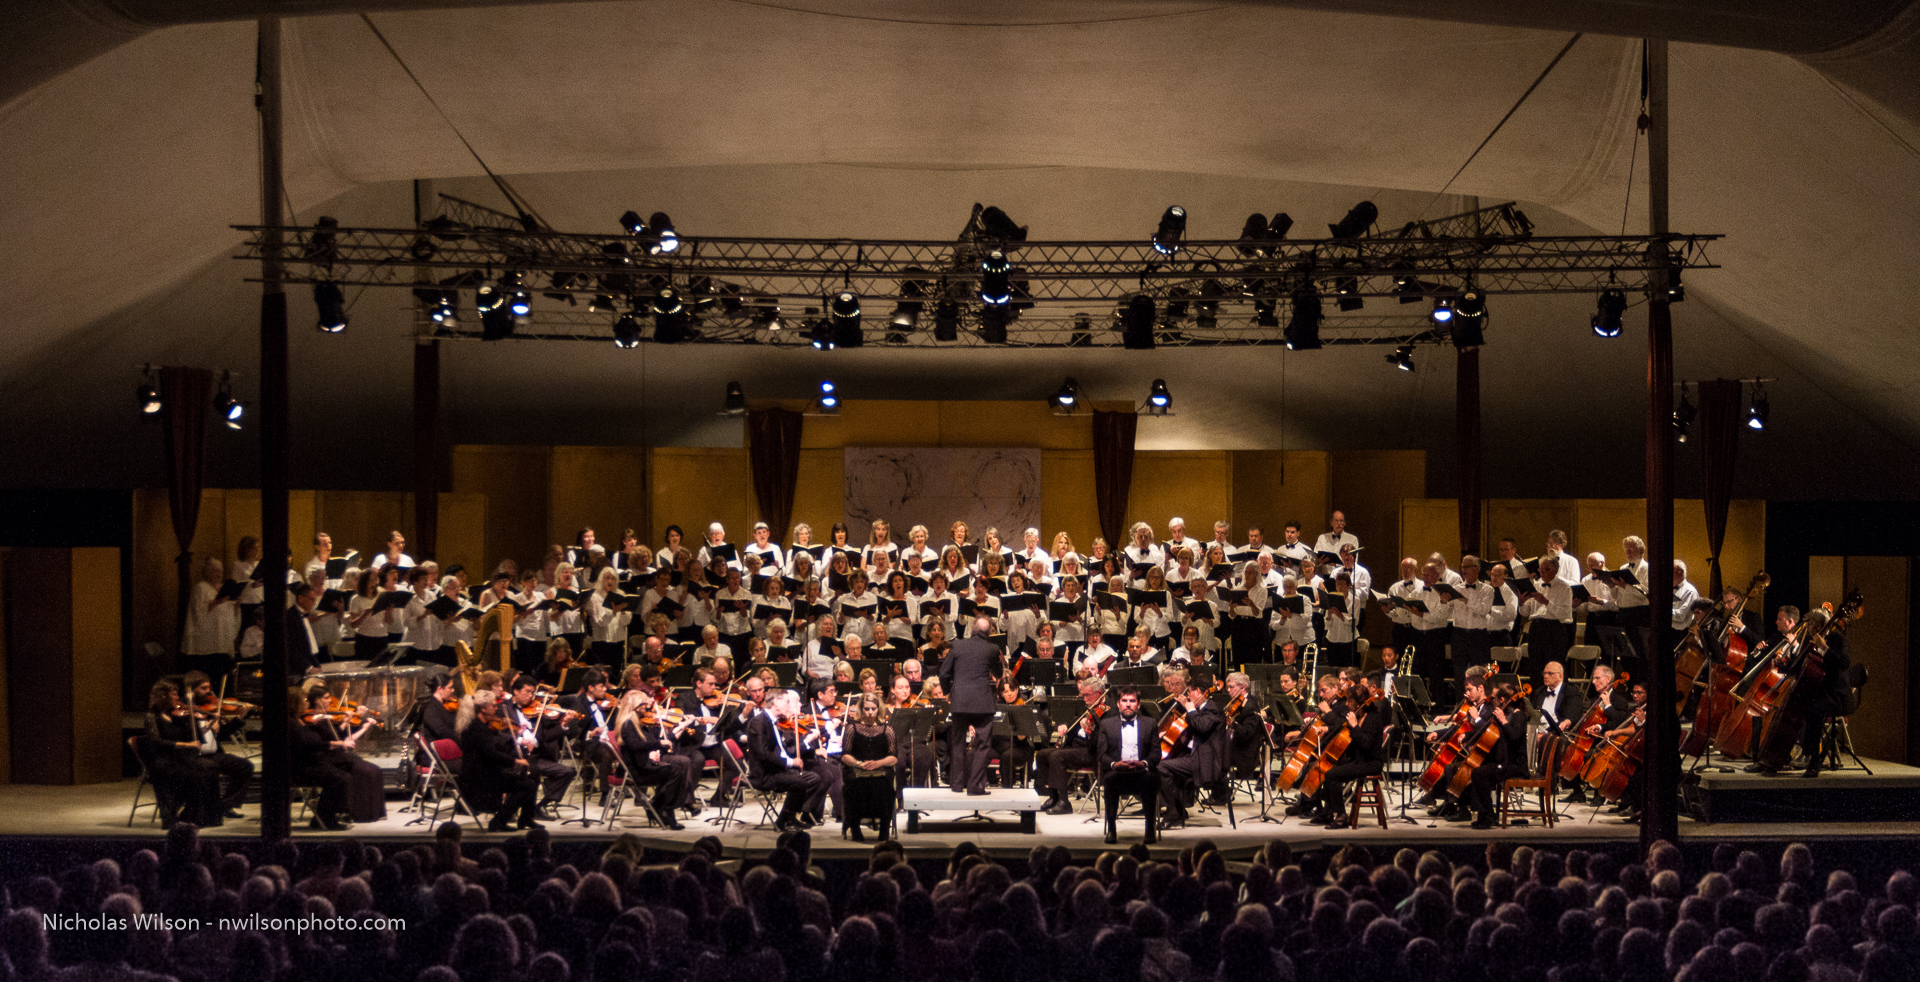 The Mendocino Music Festival Orchestra and Chorus performing the Brahms "German Requeim" with 220 people on stage and 800 in the house, concluding the 2015 festival.